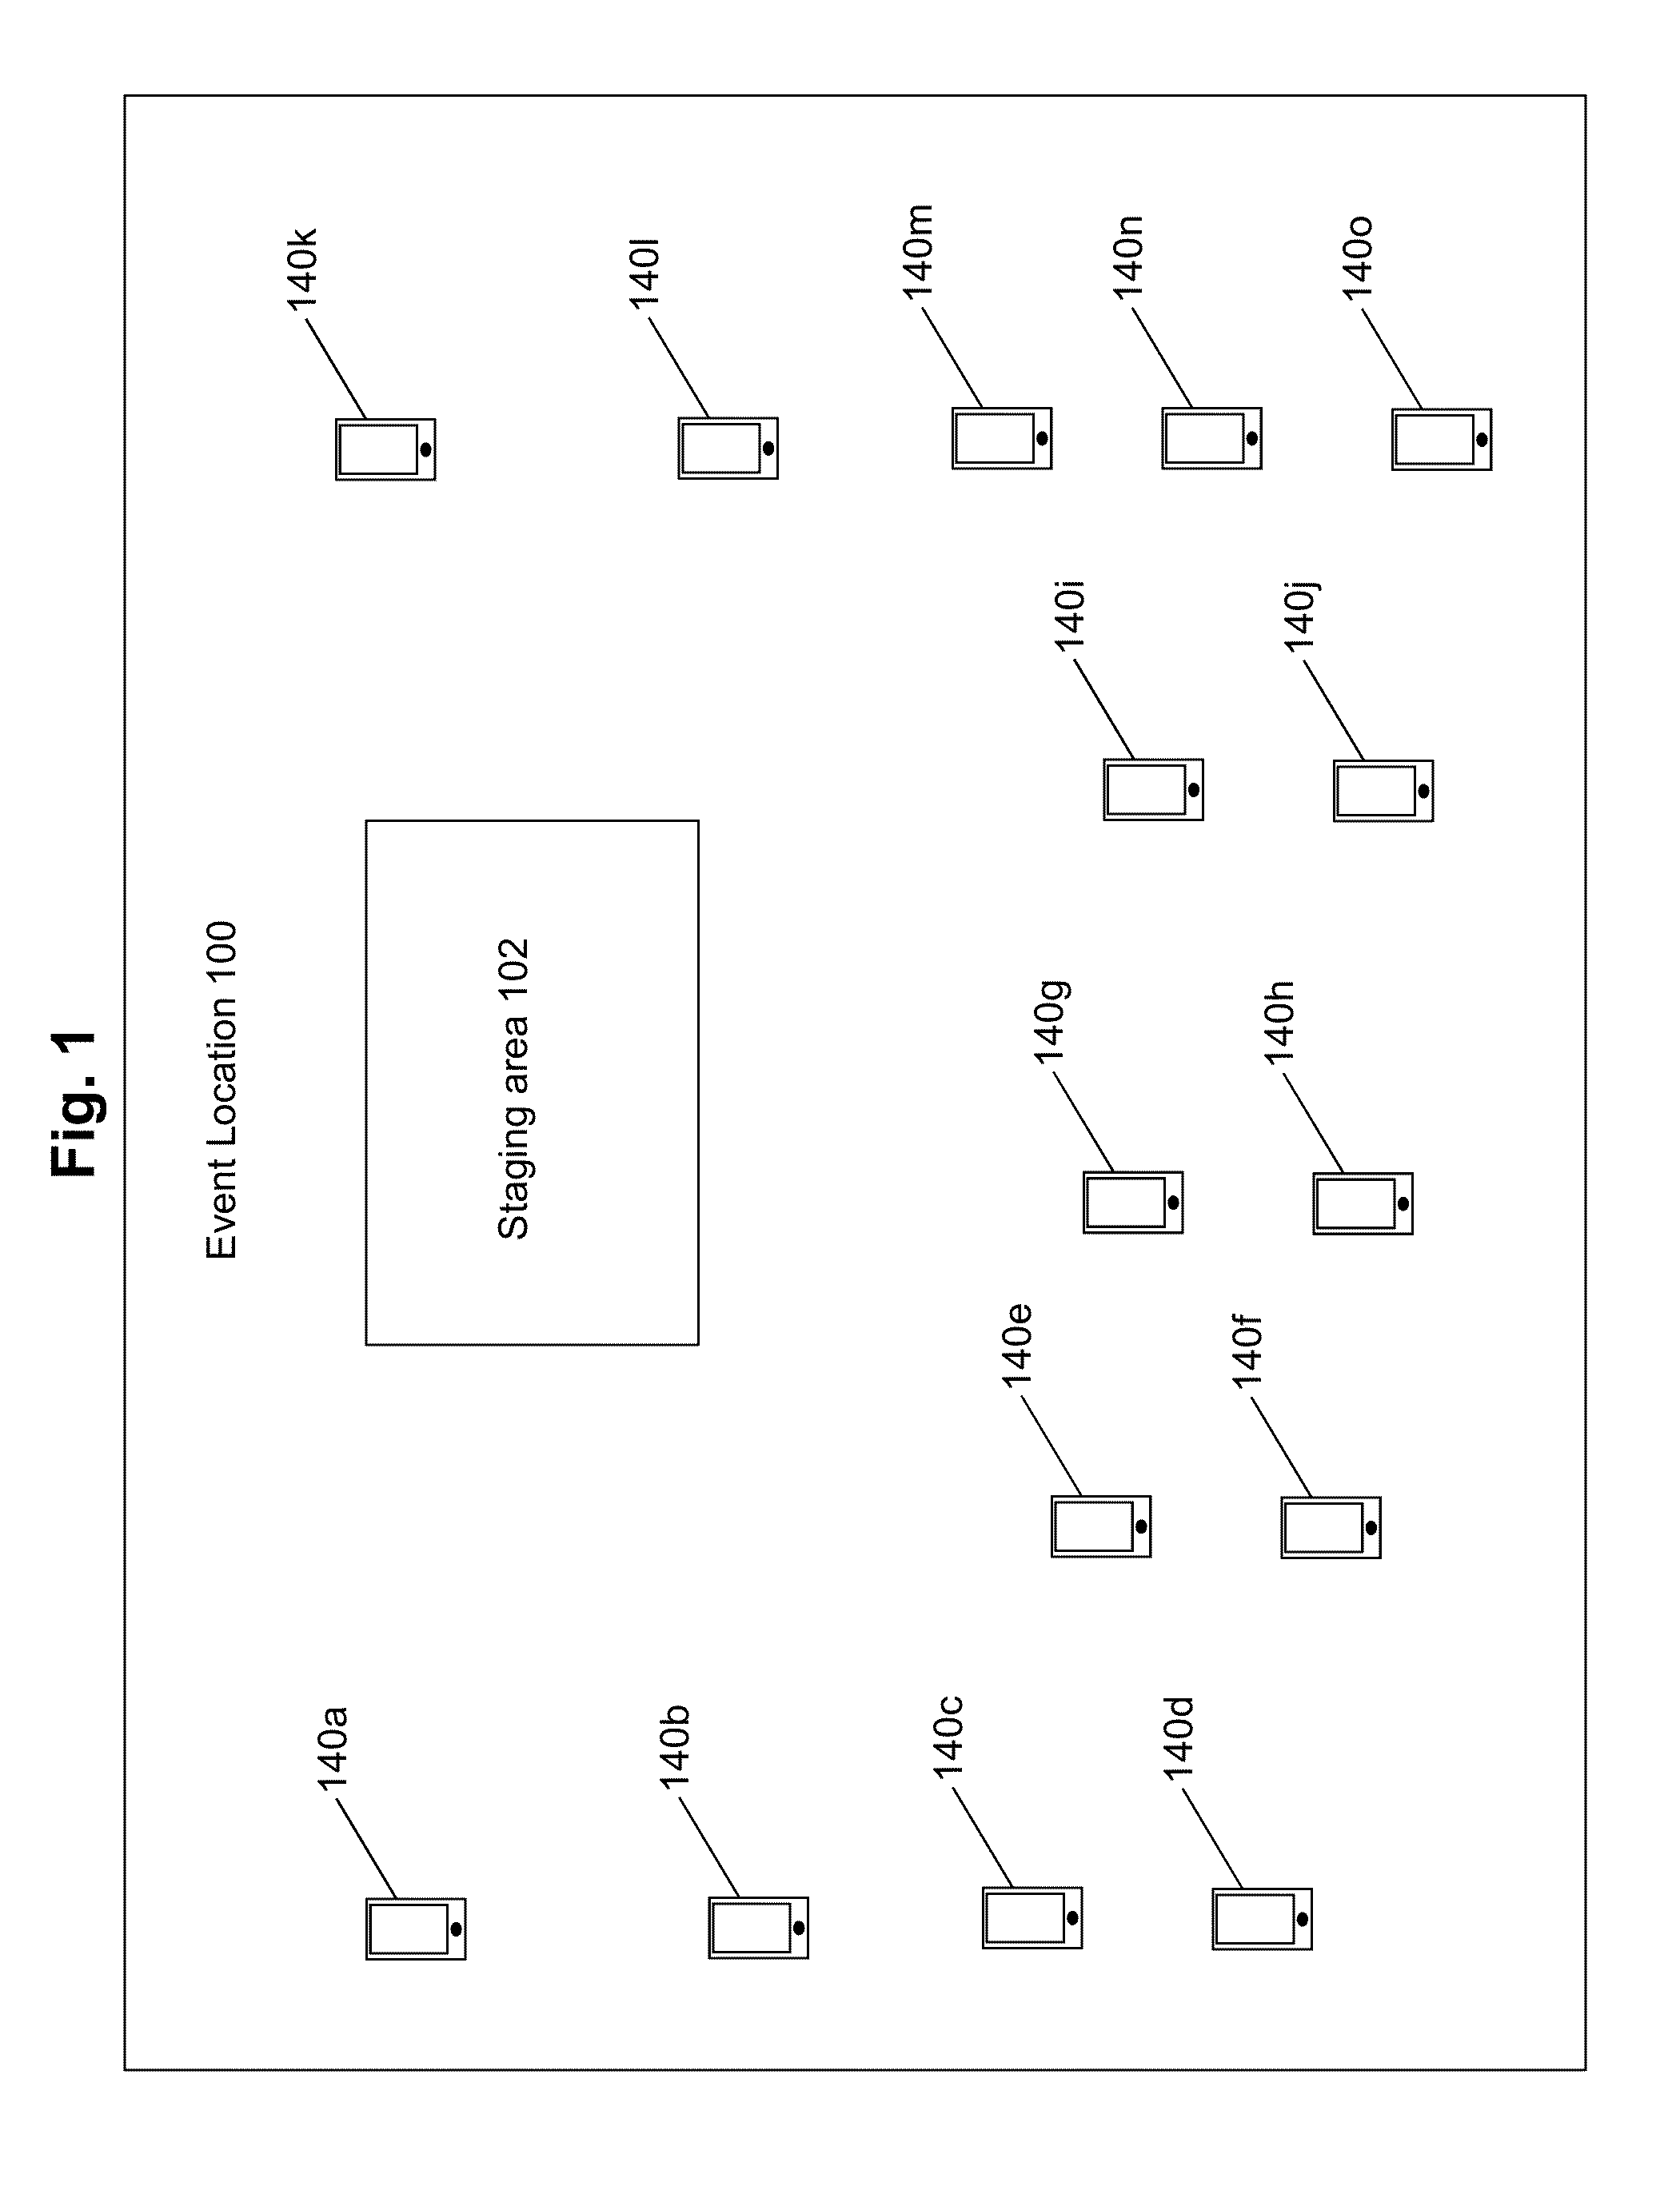 Method and mechanism for performing cloud image display and capture with mobile devices